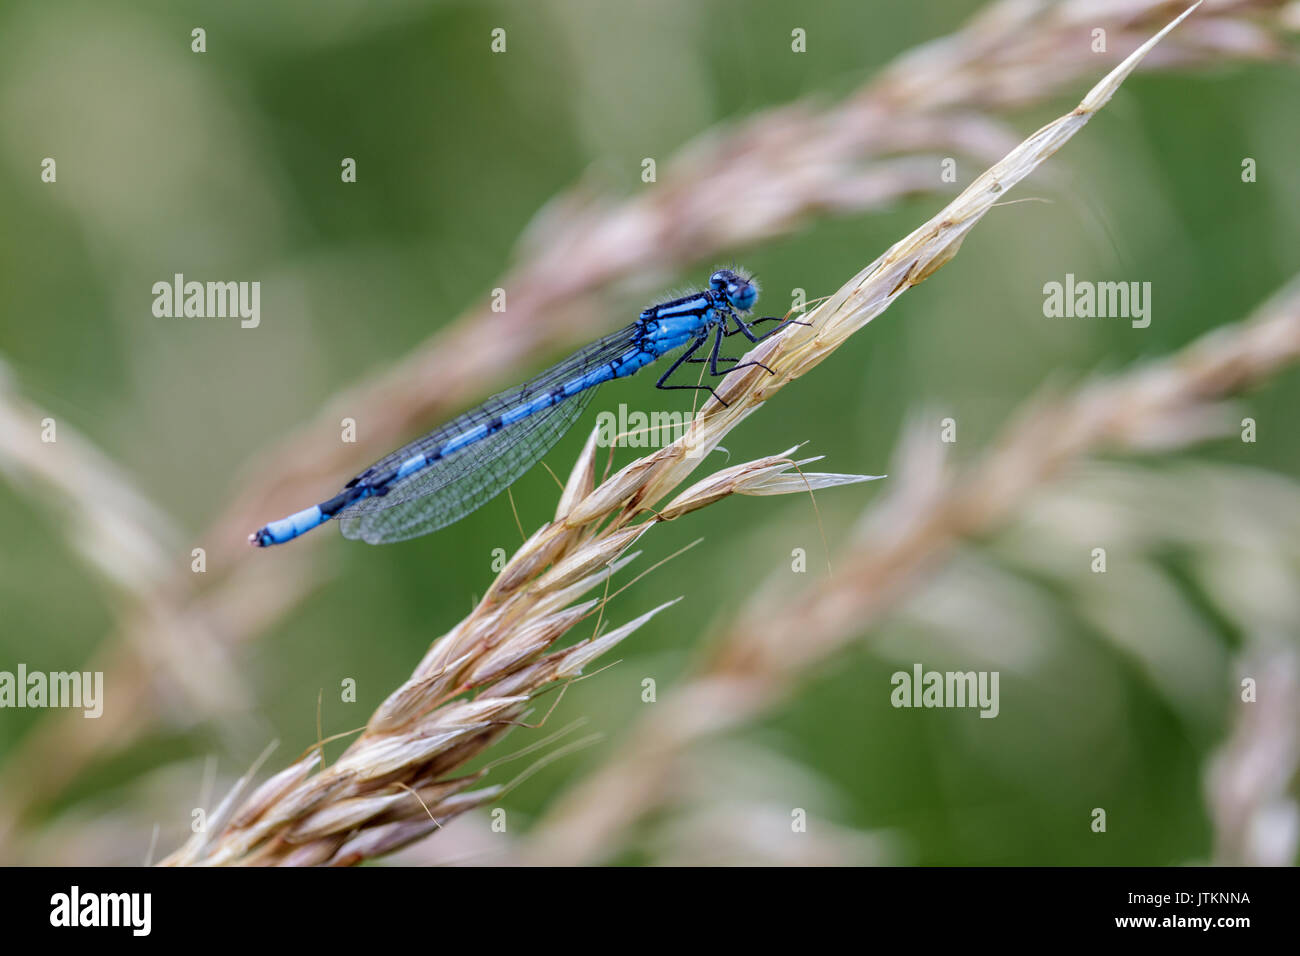 Close up of male common blue damsel fly on wild grass Stock Photo